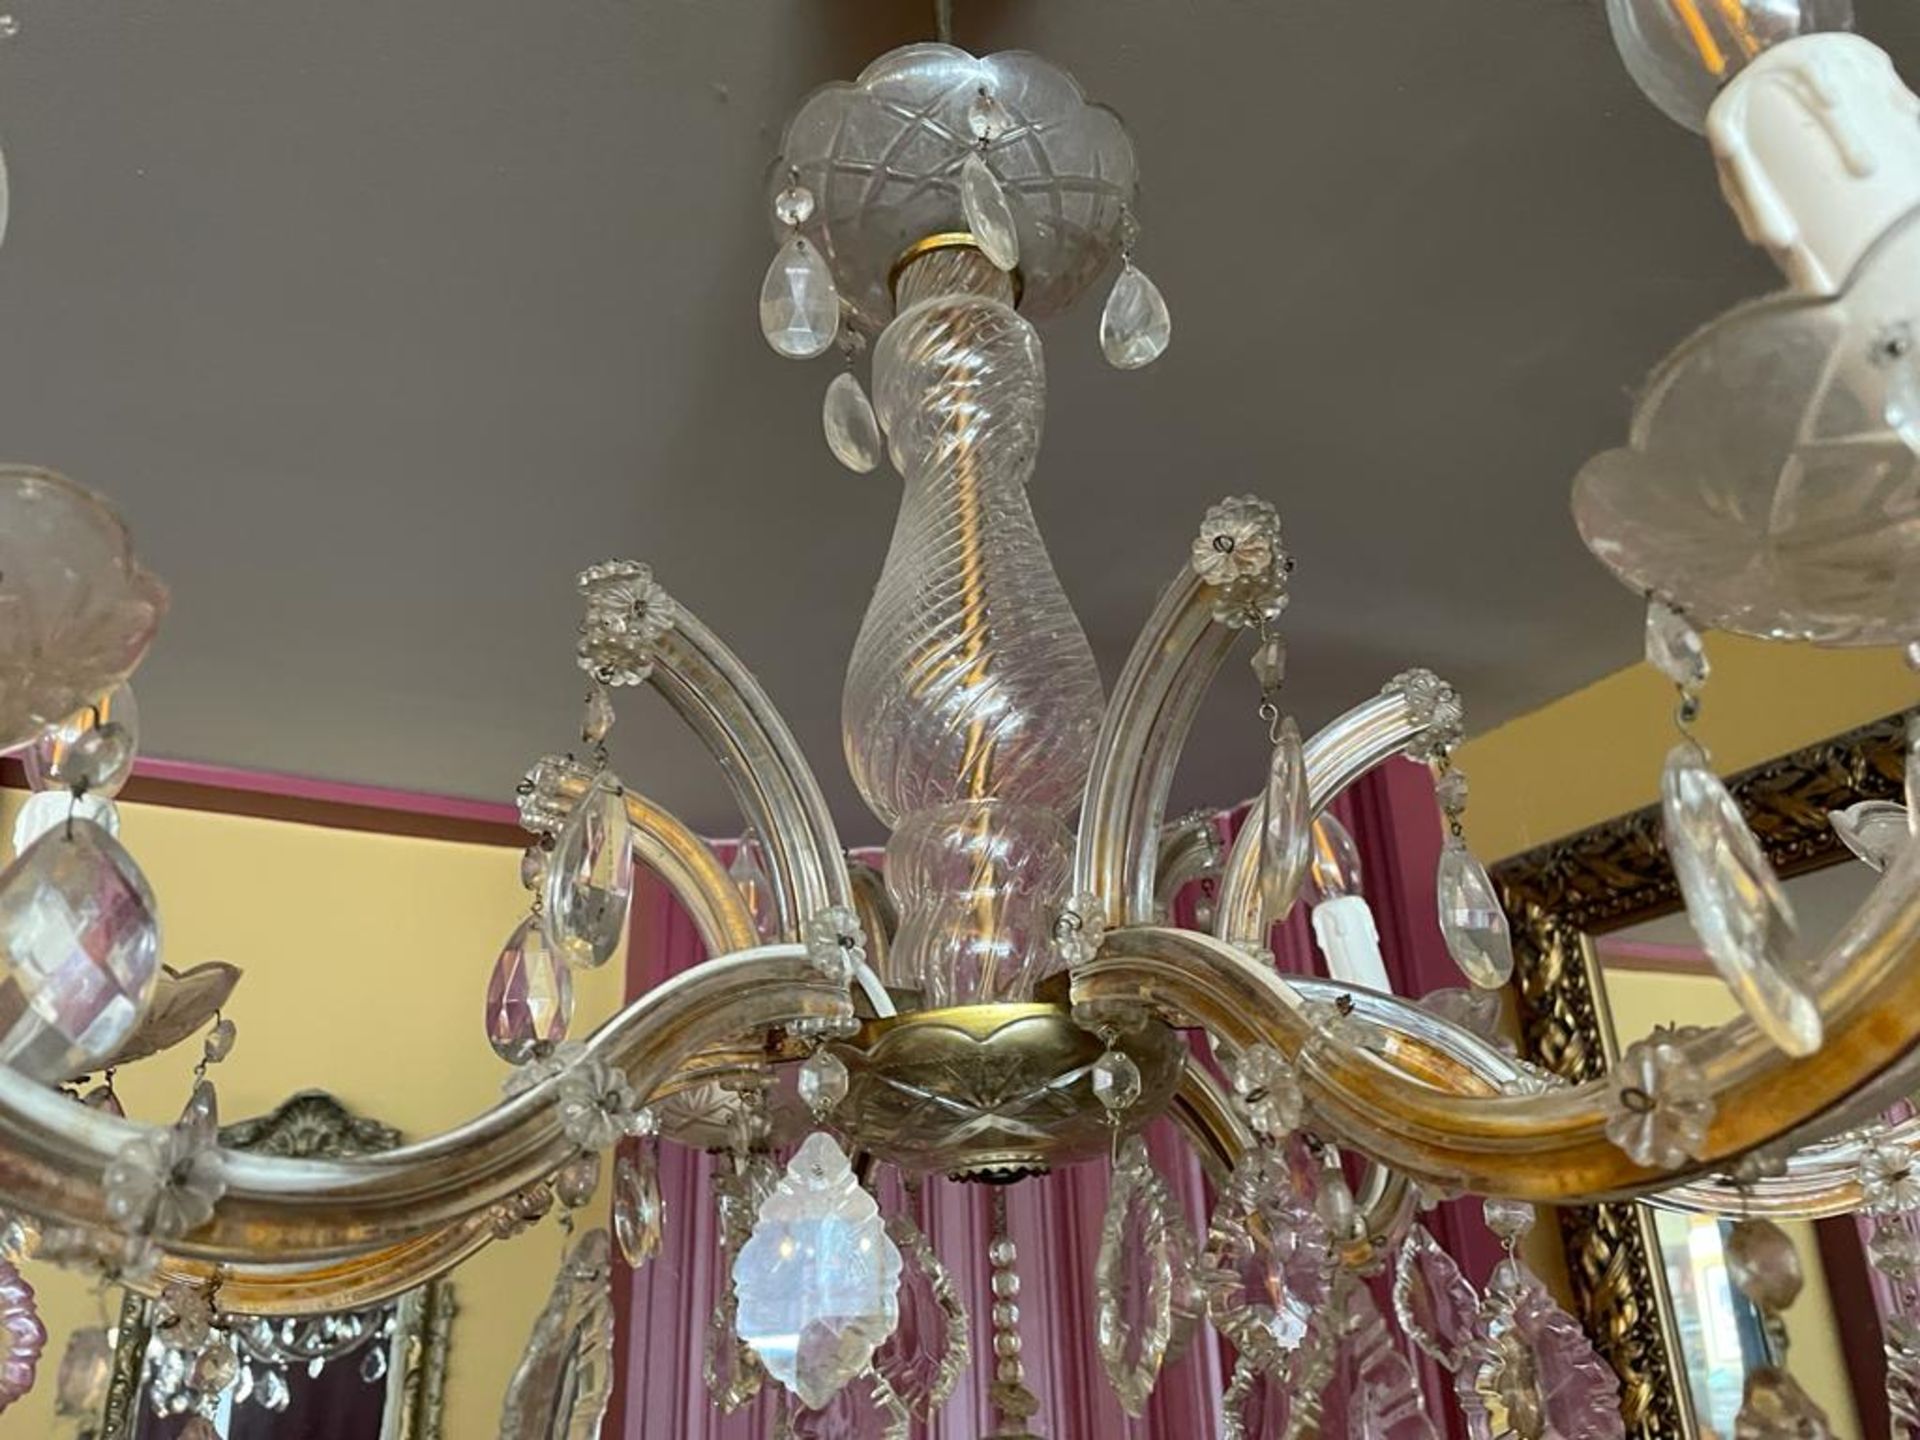 1 x Chandelier With Six Candle Lights - Ref: BK145 - CL686 - Location: Altrincham WA14This lot was - Image 3 of 5